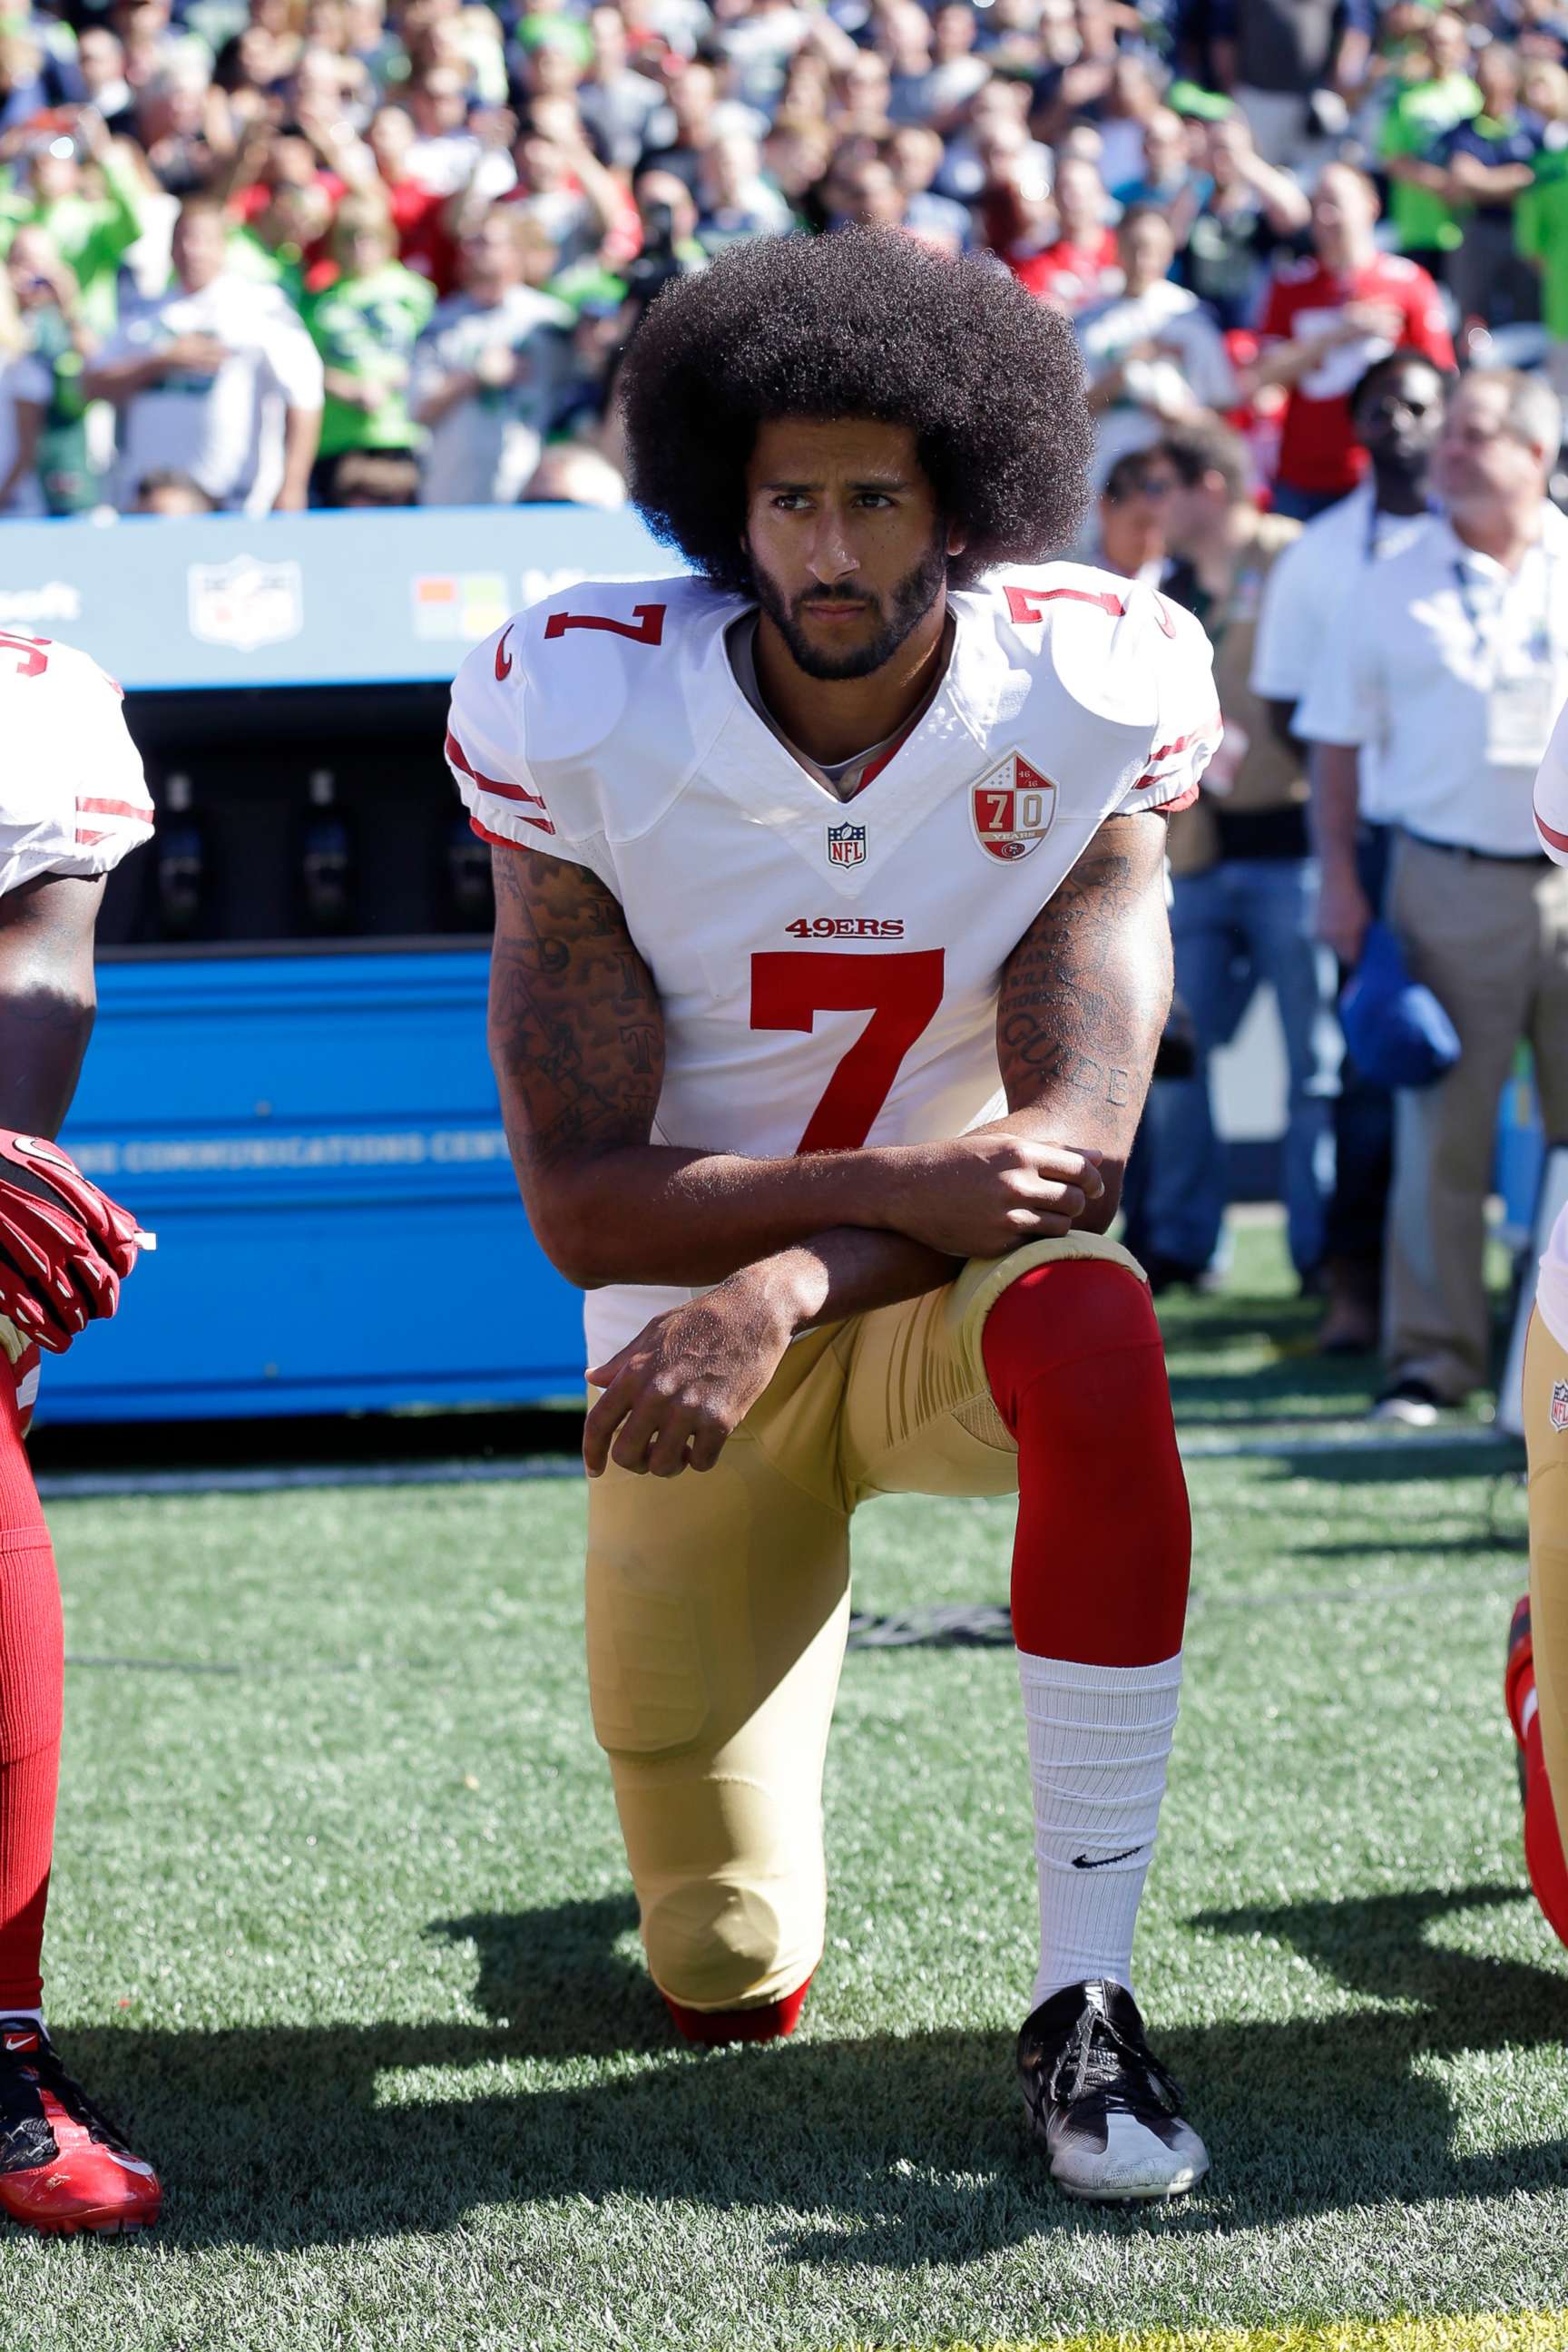 PHOTO: San Francisco 49ers' Colin Kaepernick kneels during the national anthem before an NFL football game against the Seattle Seahawks in Seattle, Sept. 25, 2016.